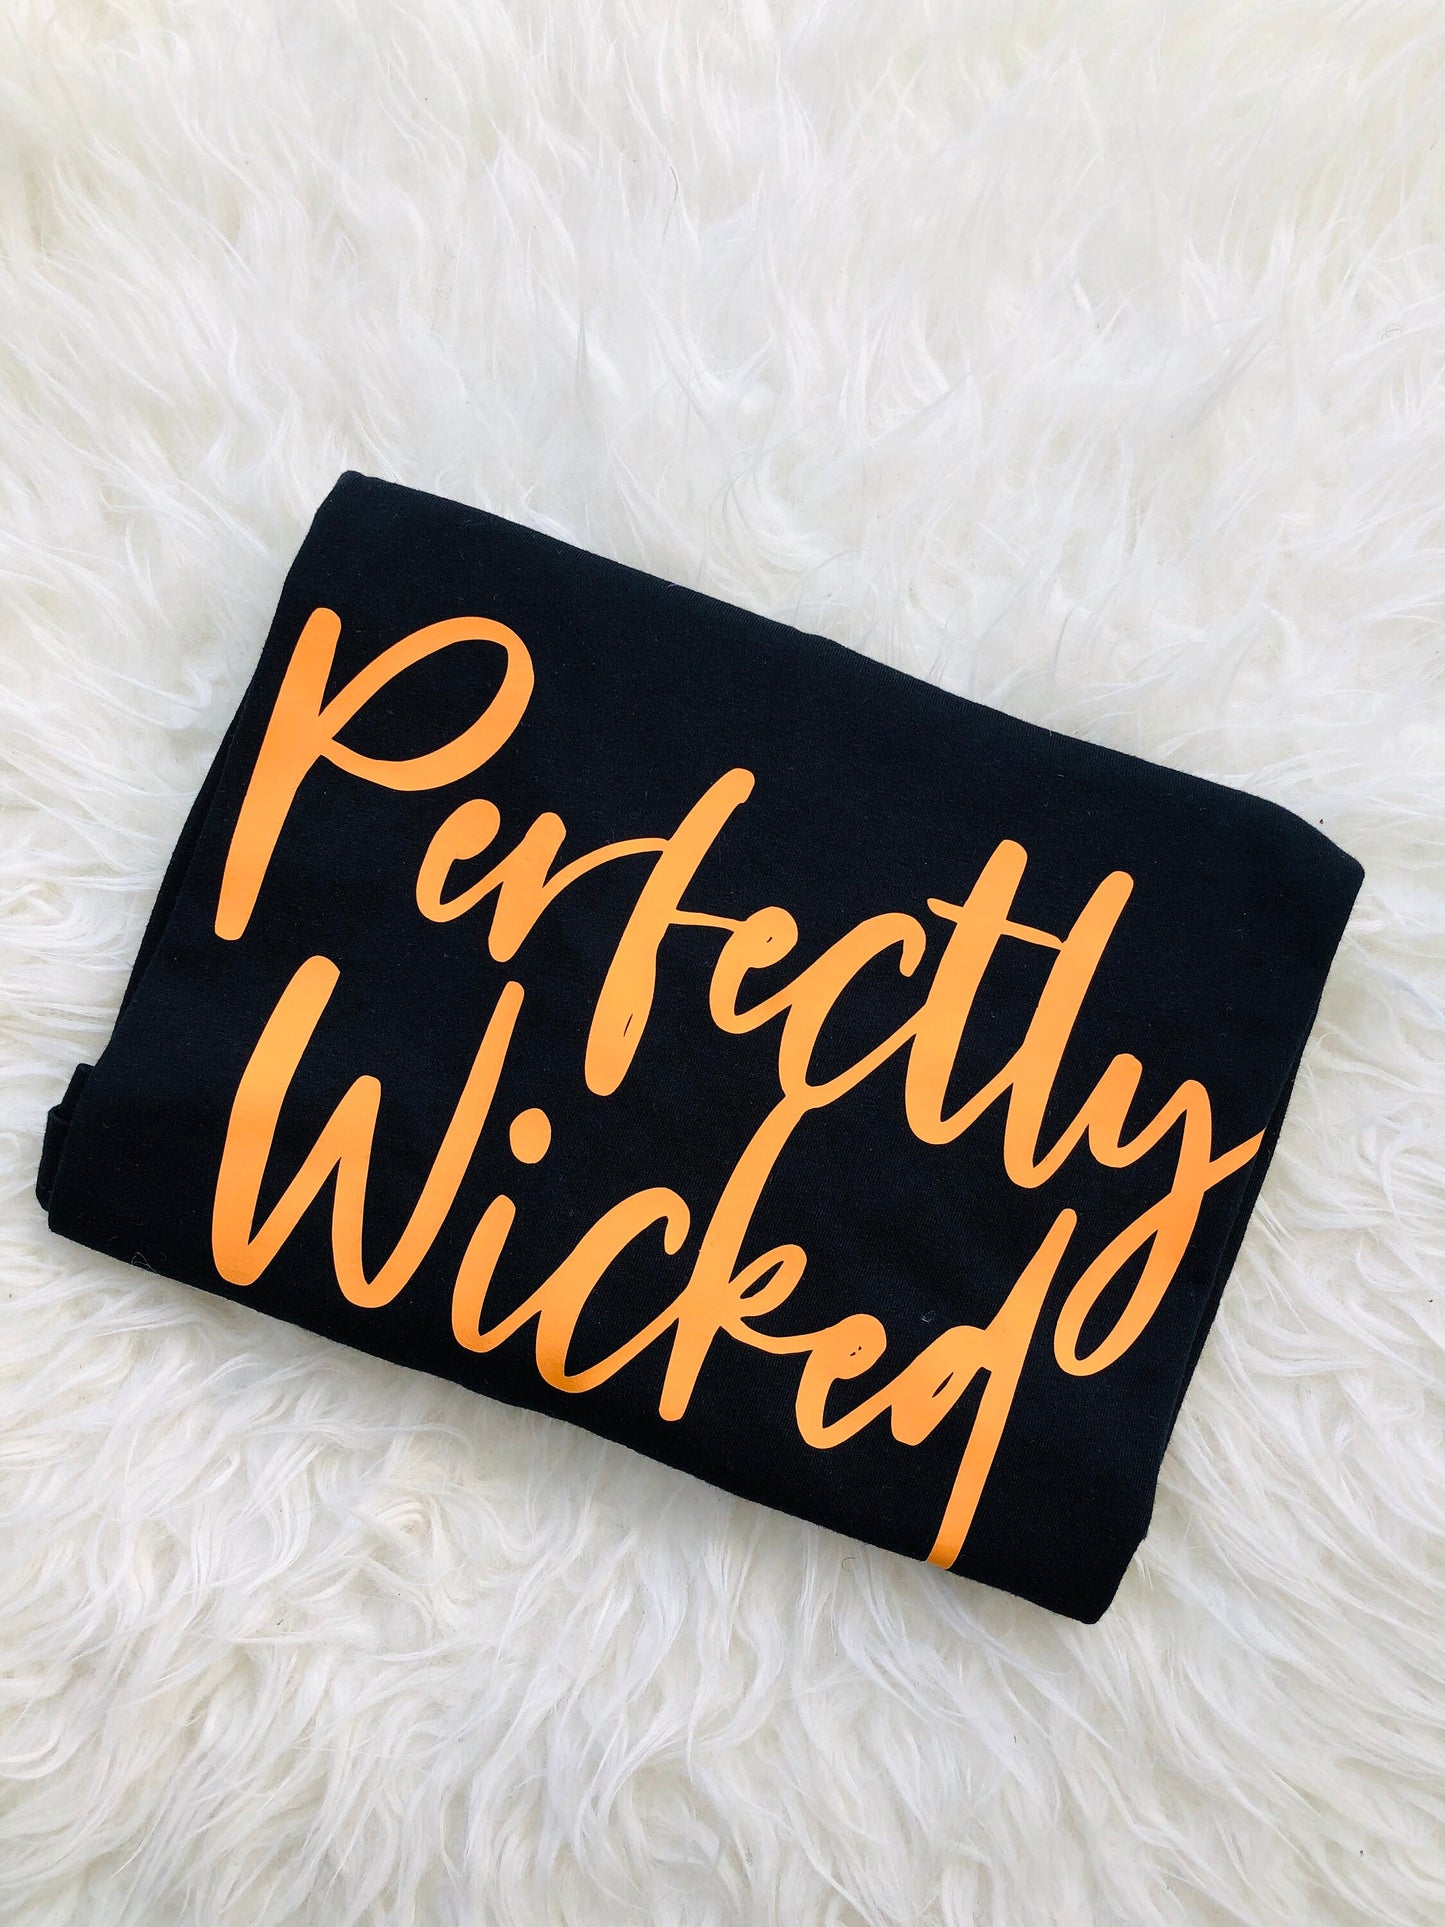 Perfectly Wicked Slogan T-shirt, Spooky Season, Bad Witch Vibes Tee